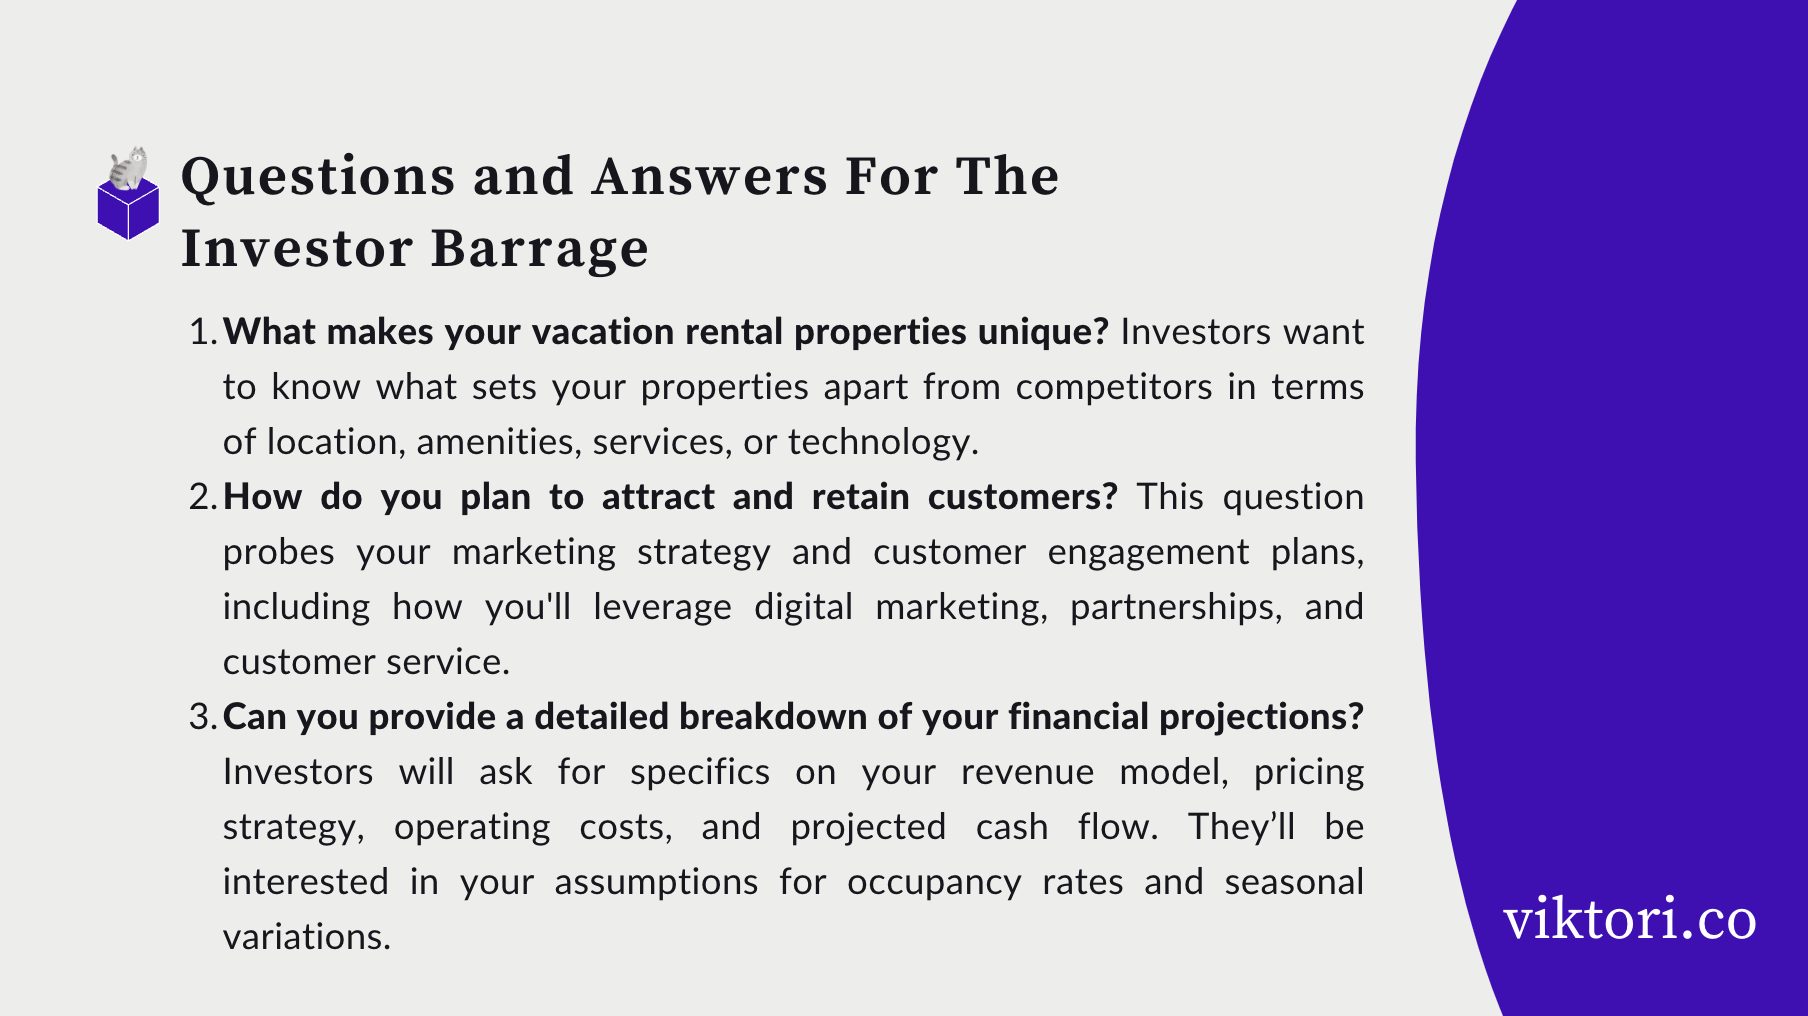 Questions That Investors Ask Vacation Rental Pitch Deck Owners: Vacation rental pitch deck guide